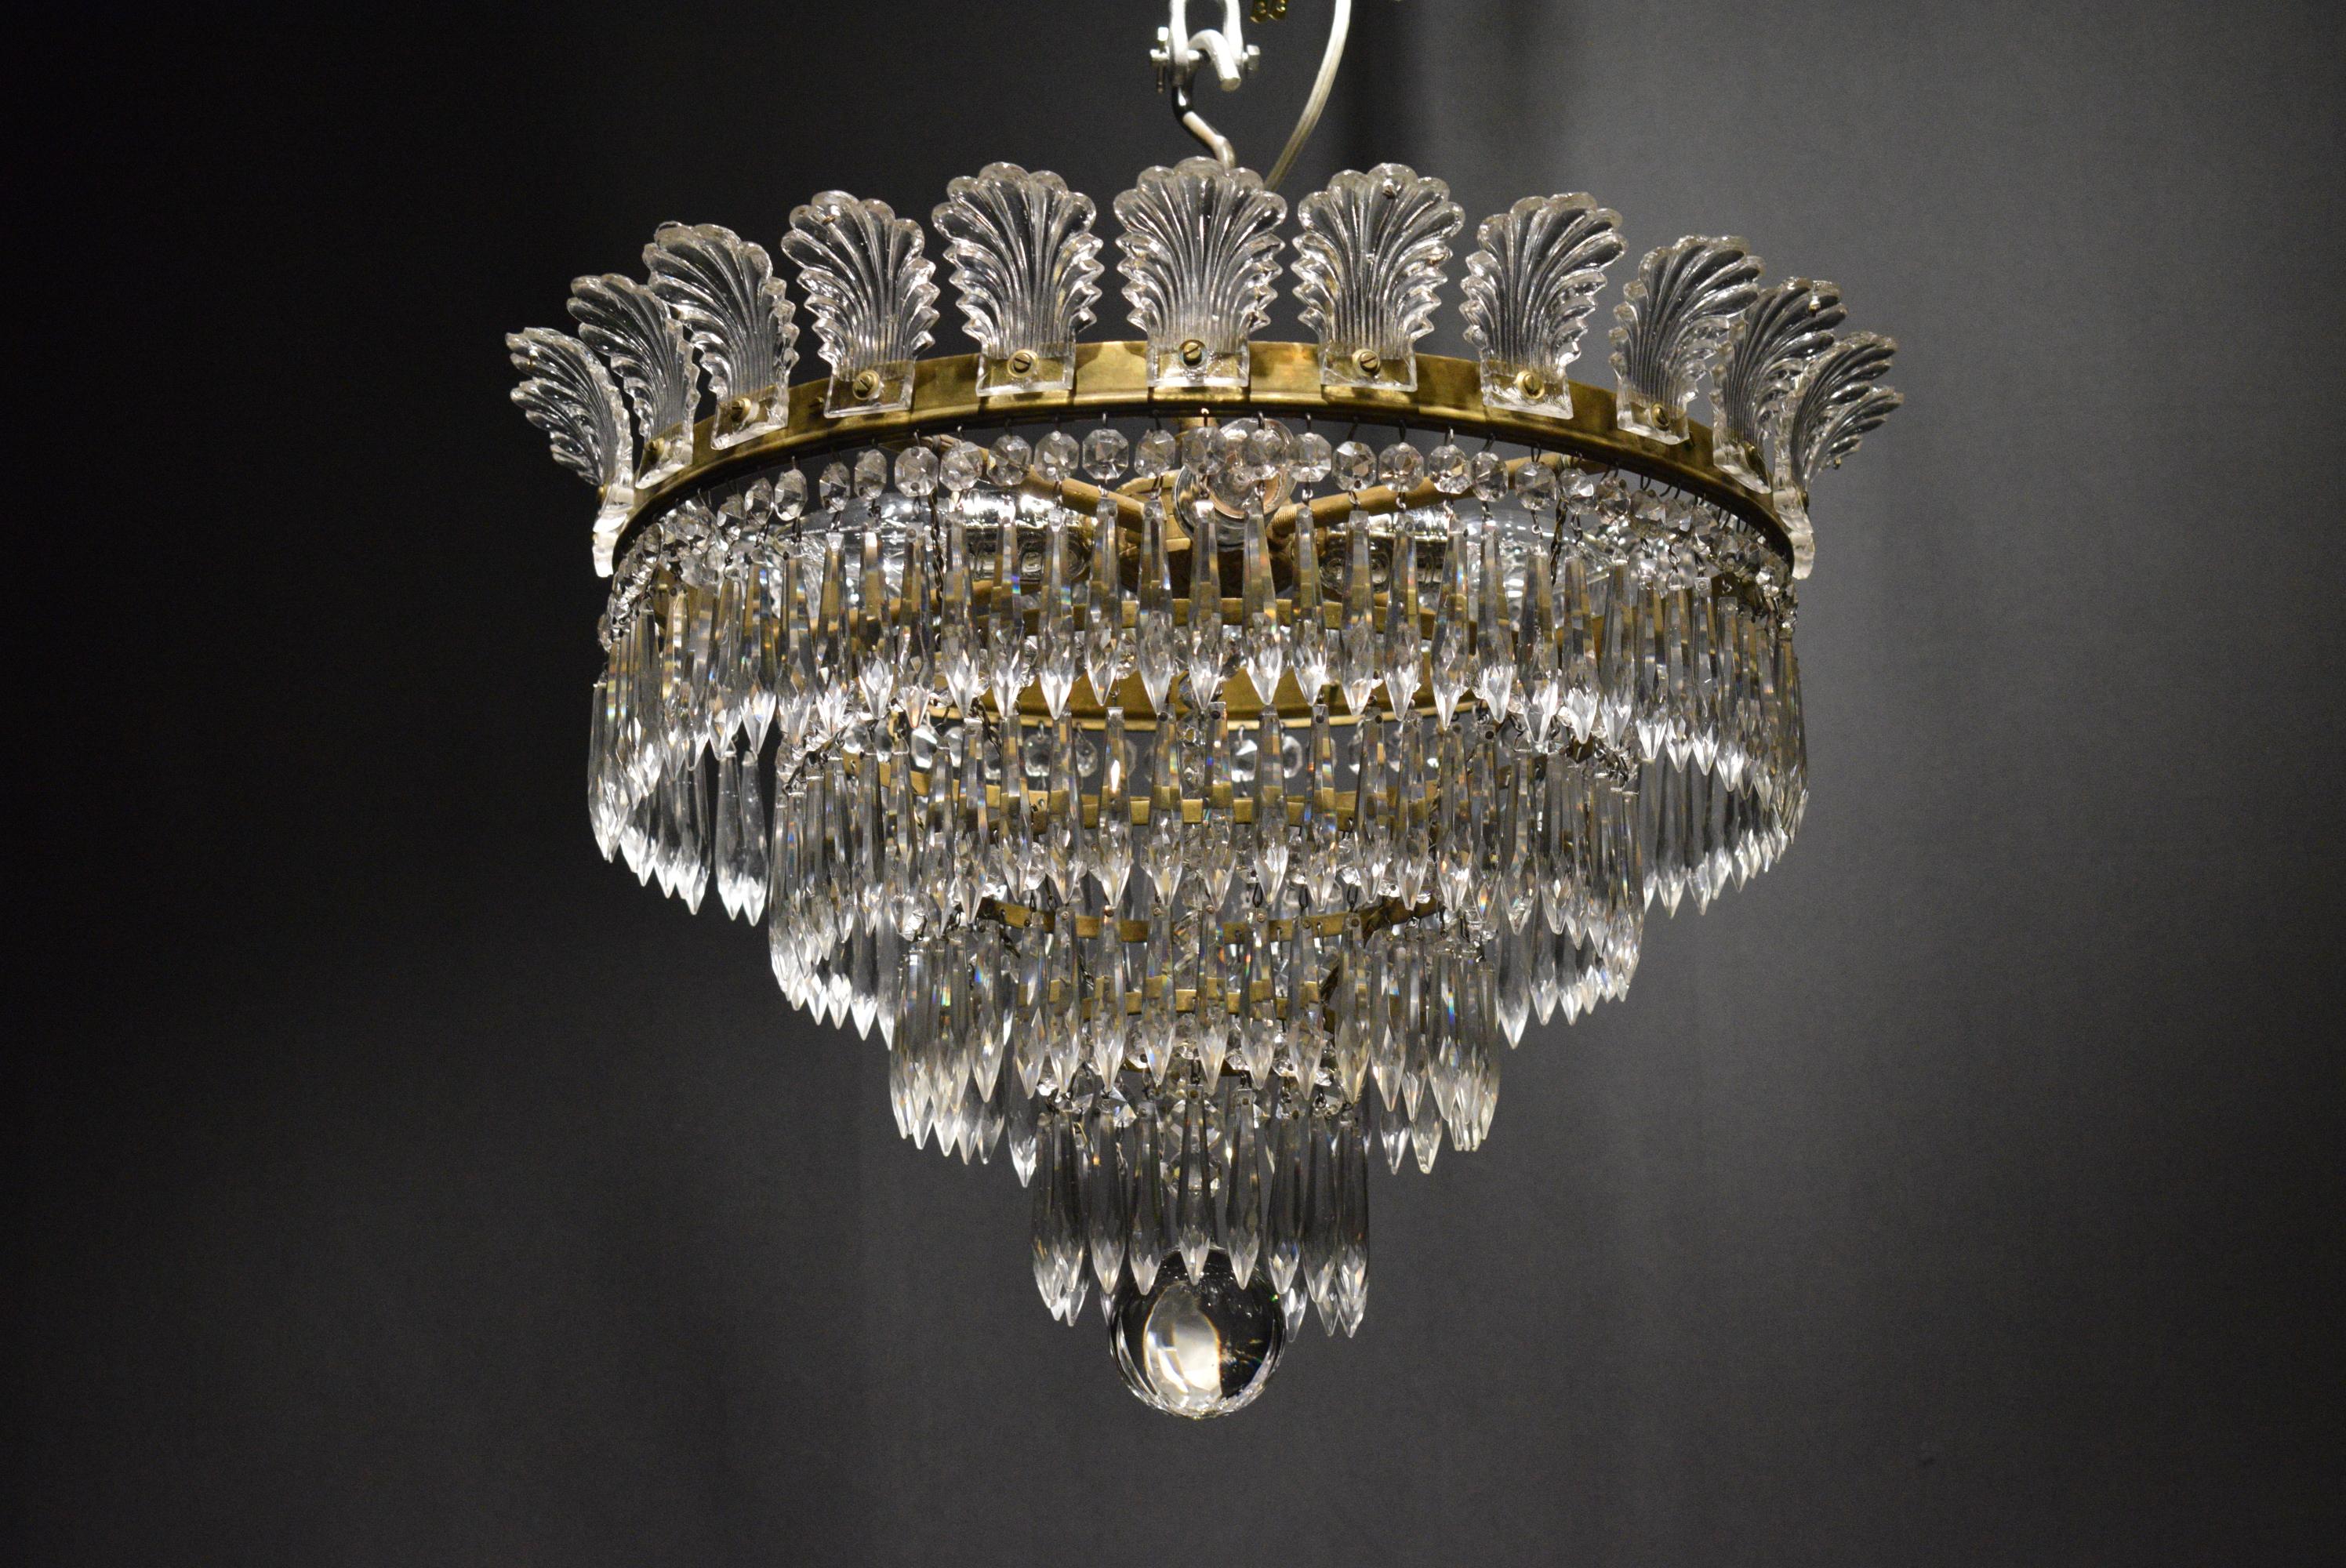 A very fine bronze and crystal pendant by Baccarat.
France, circa 1910. 4 lights
Dimensions: Height 14 1/2